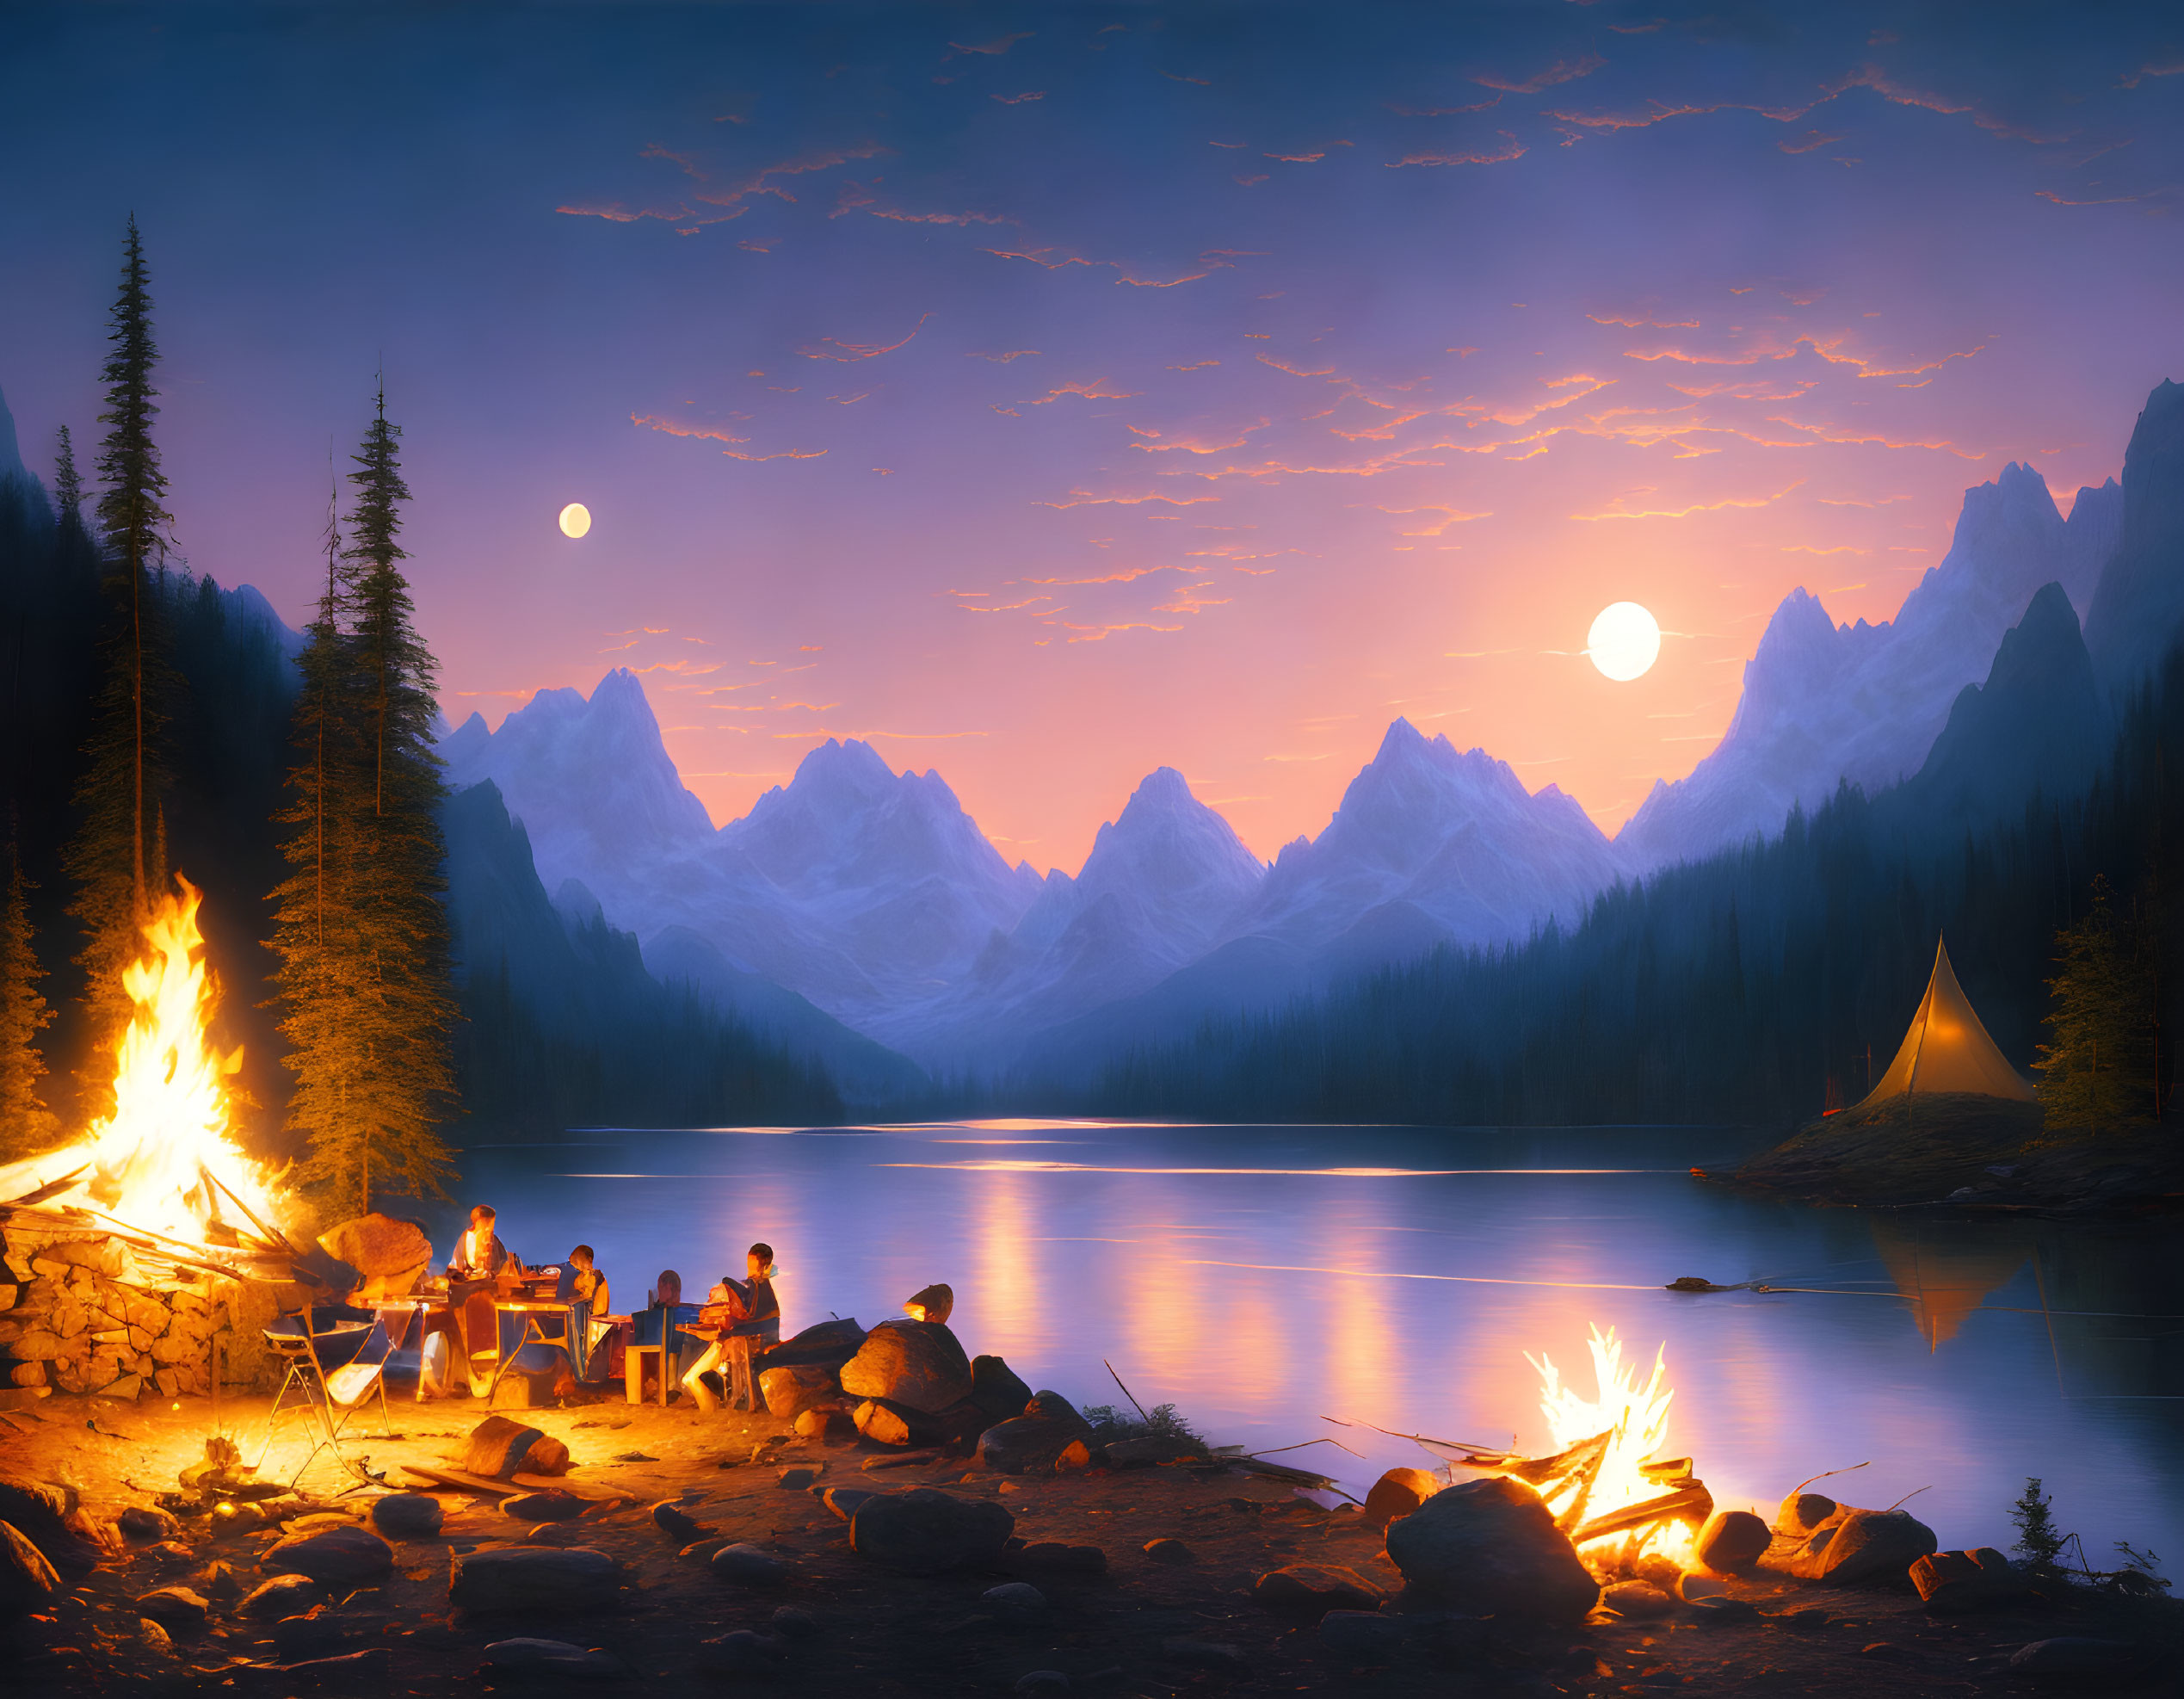 Camping scene by lake: people around fire, lit tents, mountains, dusk sky with two moons